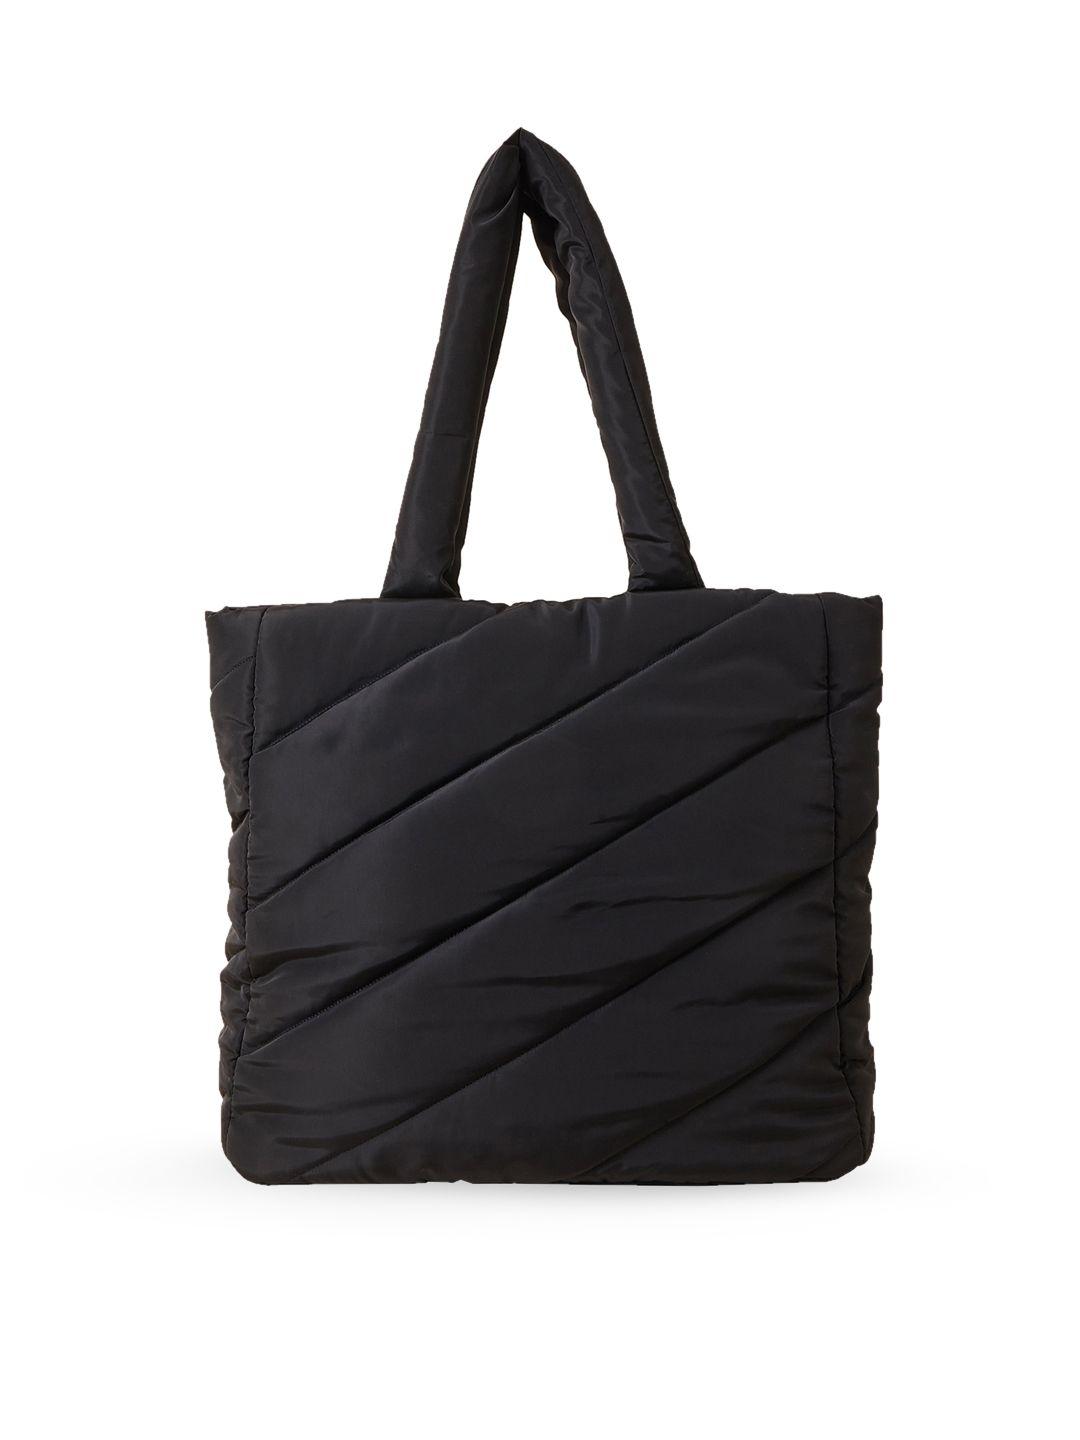 accessorize oversized shopper tote bag with quilted